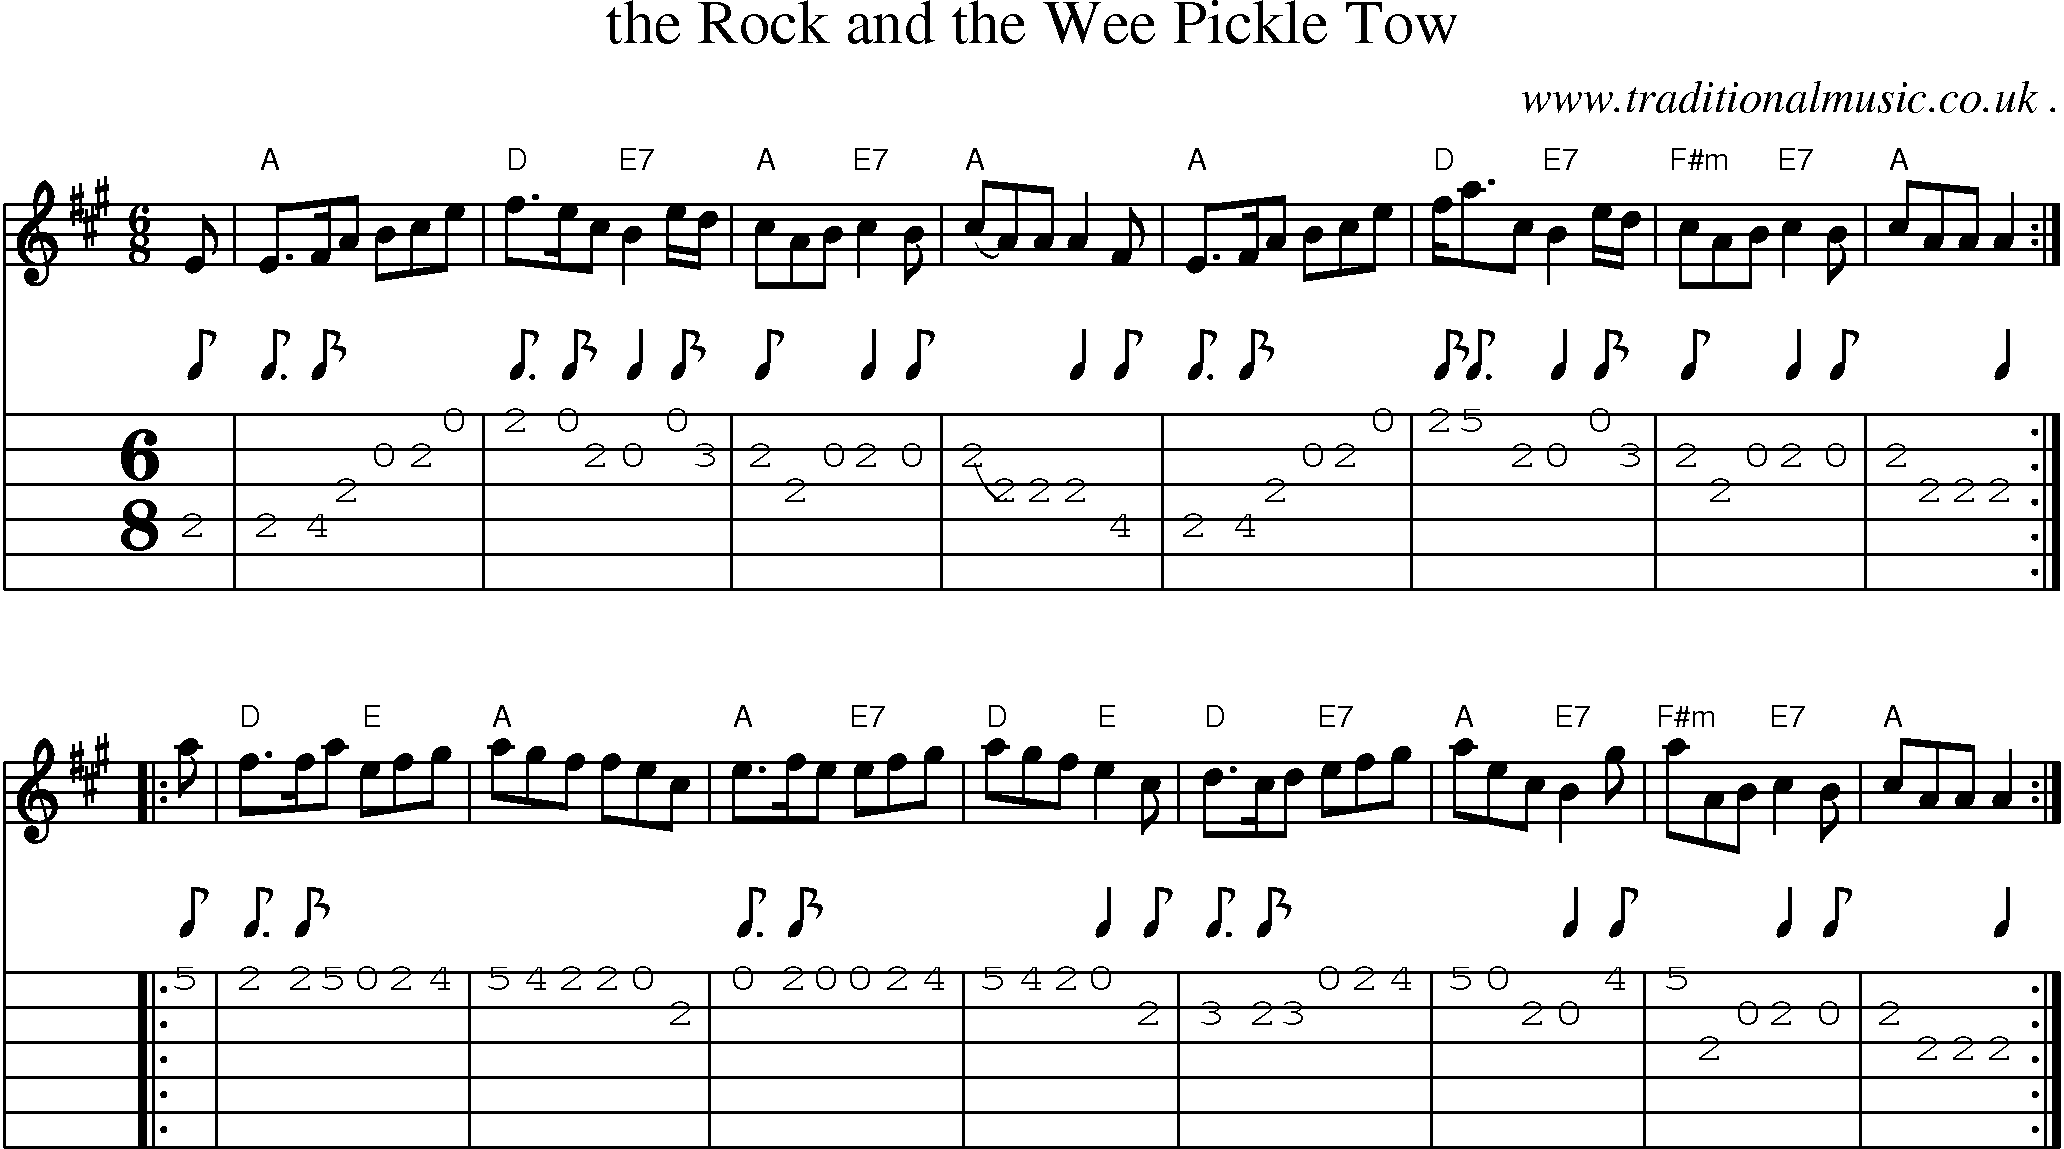 Sheet-music  score, Chords and Guitar Tabs for The Rock And The Wee Pickle Tow